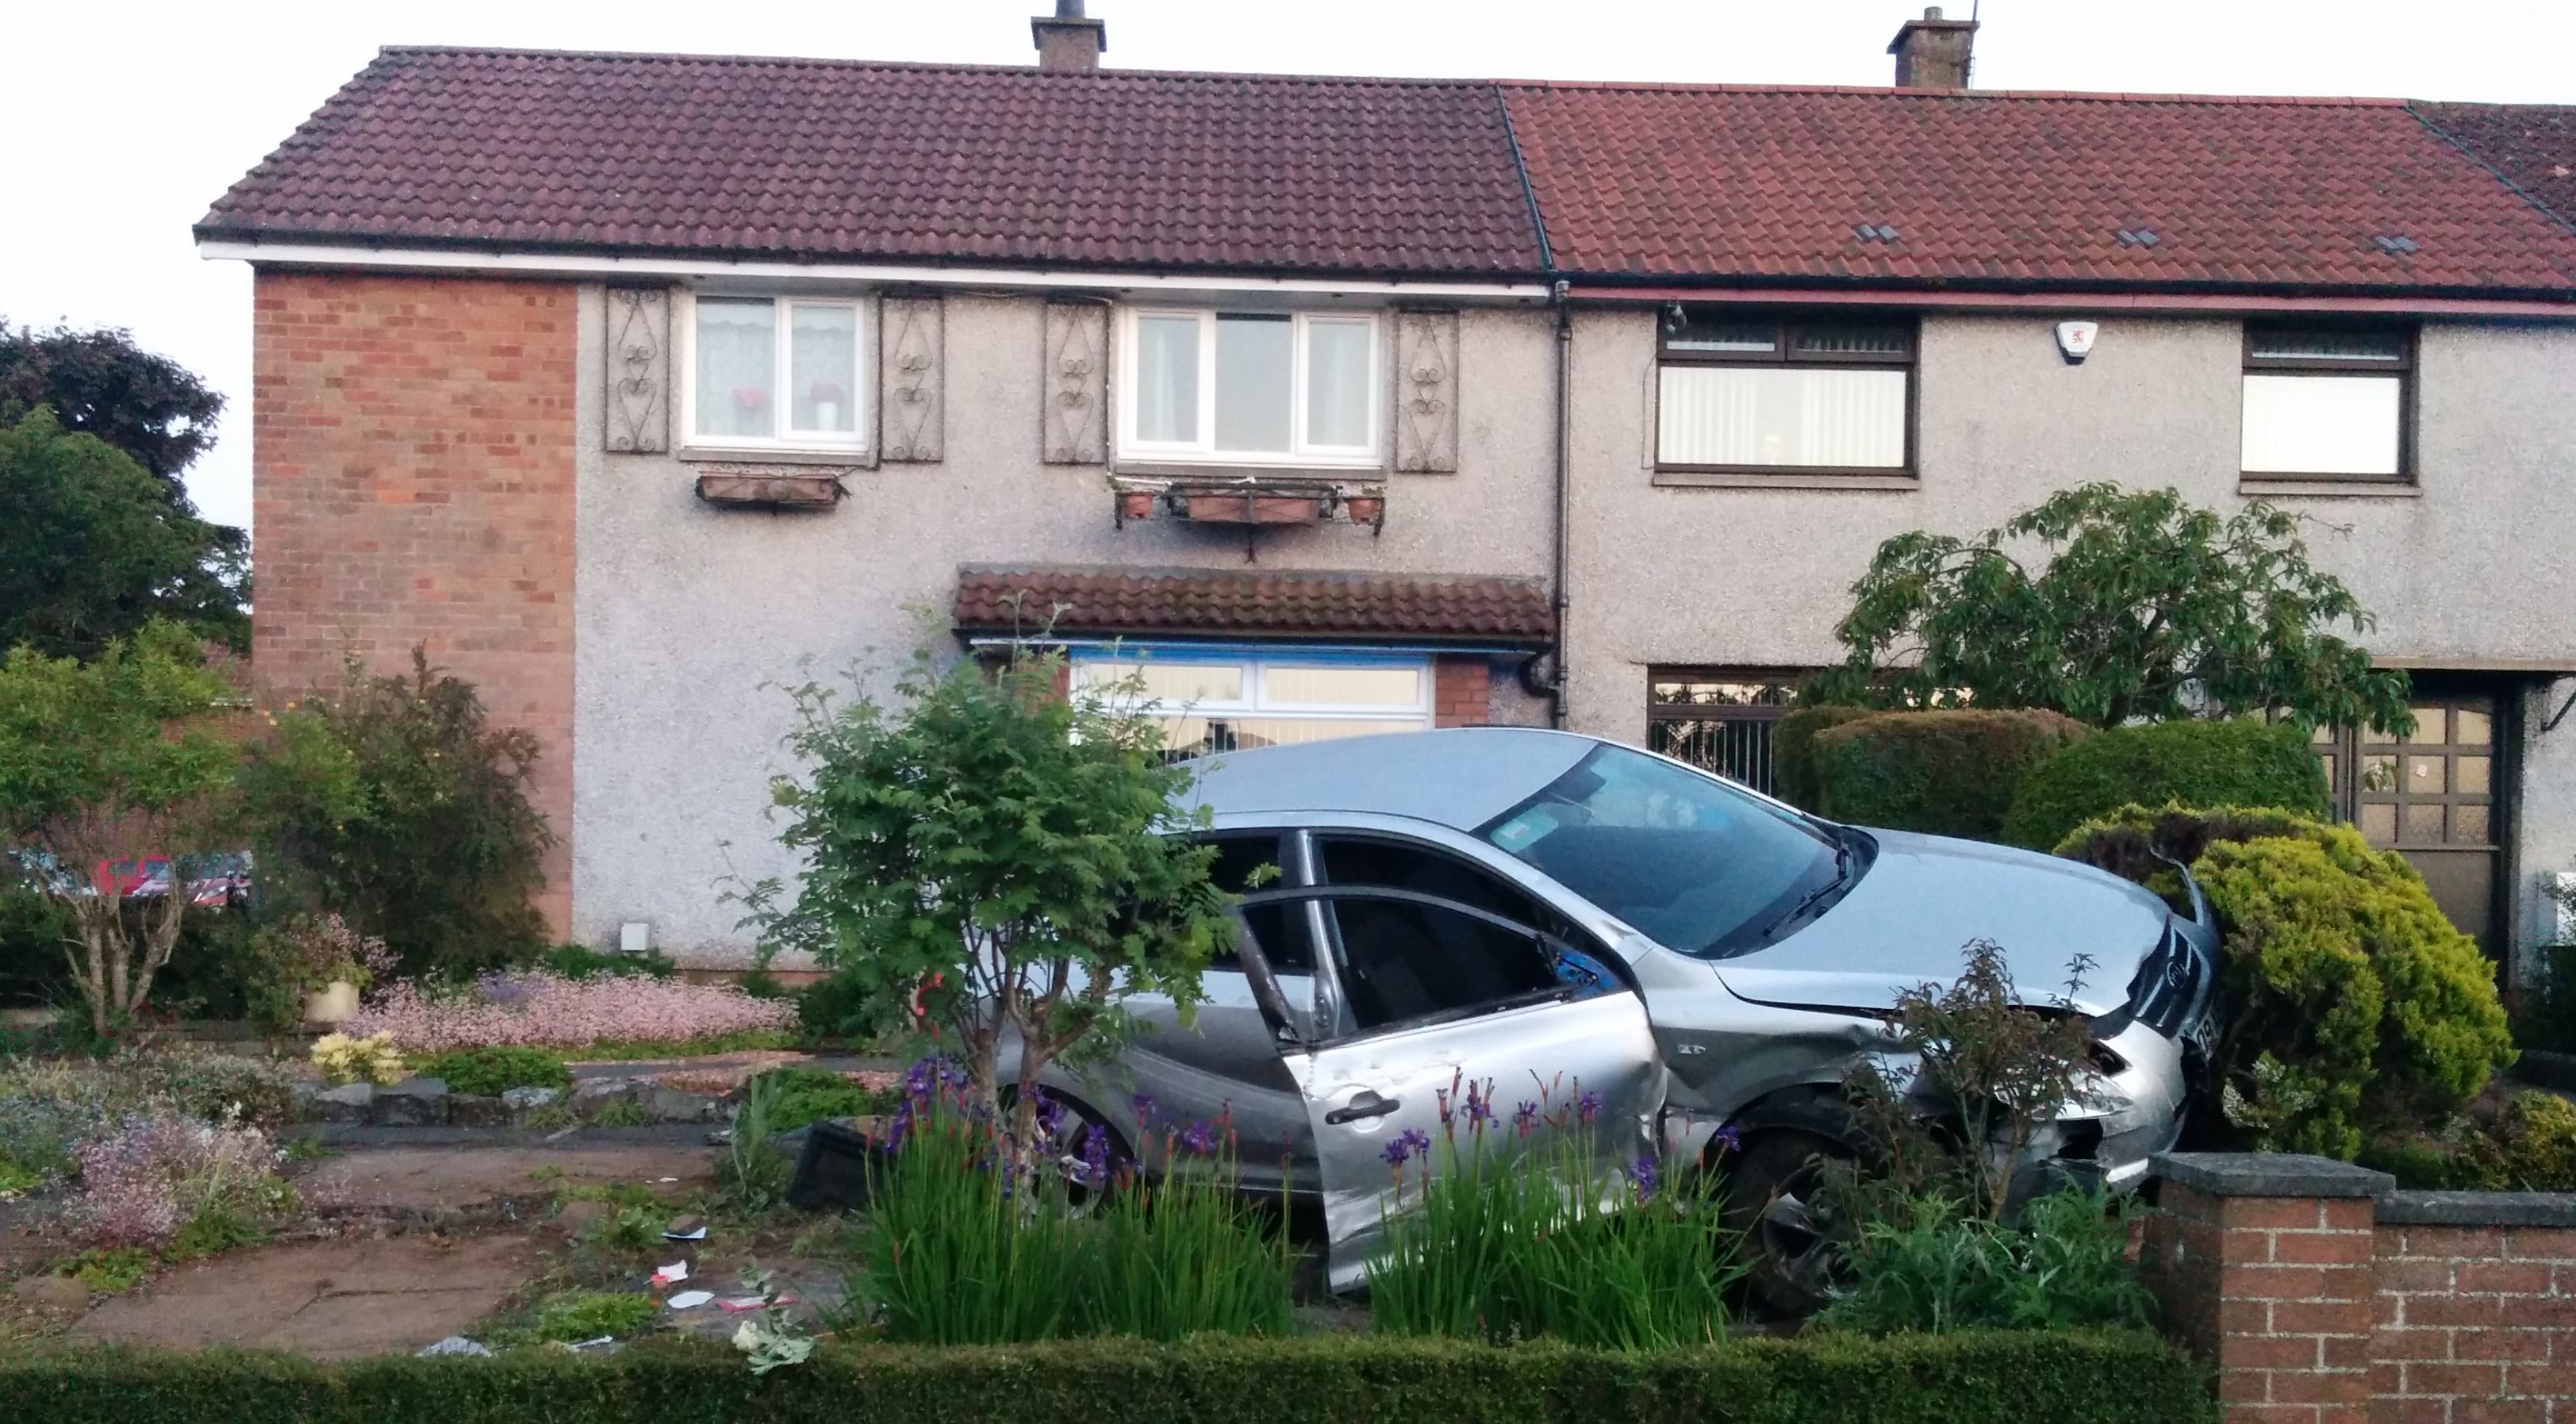 The car overturned and landed in a garden in South Parks Road